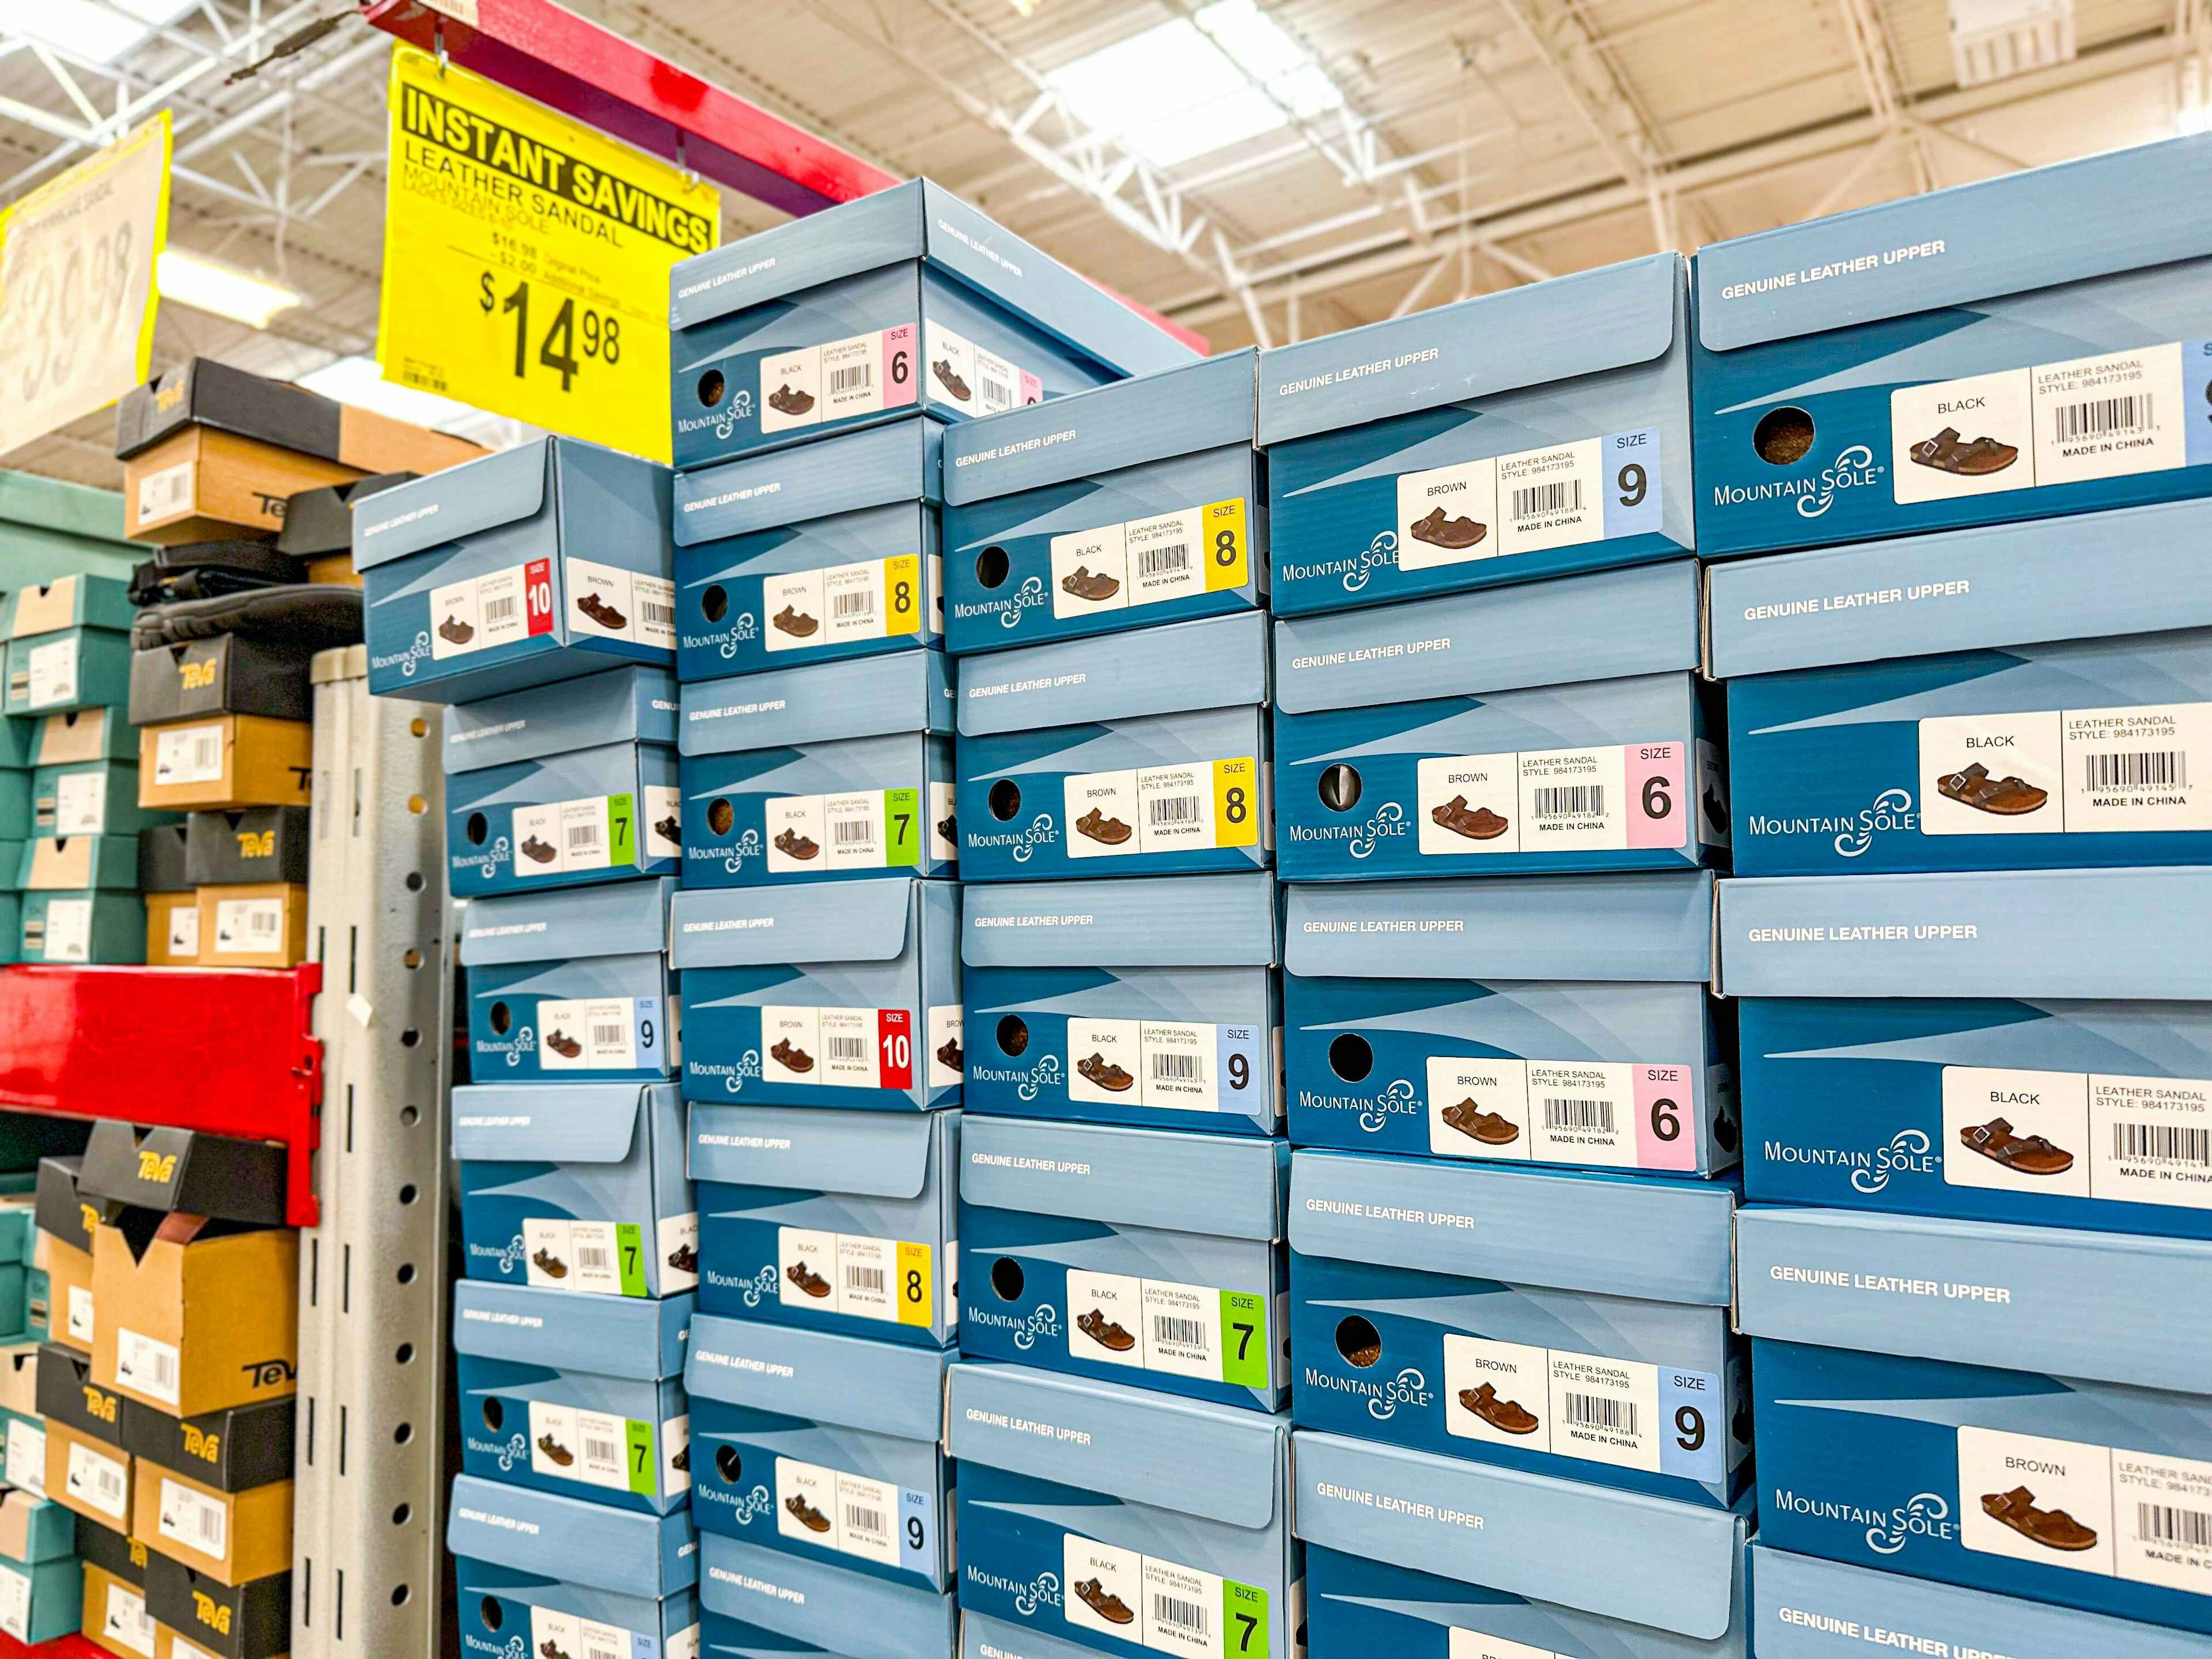 boxes of sandals with a $14.98 sign